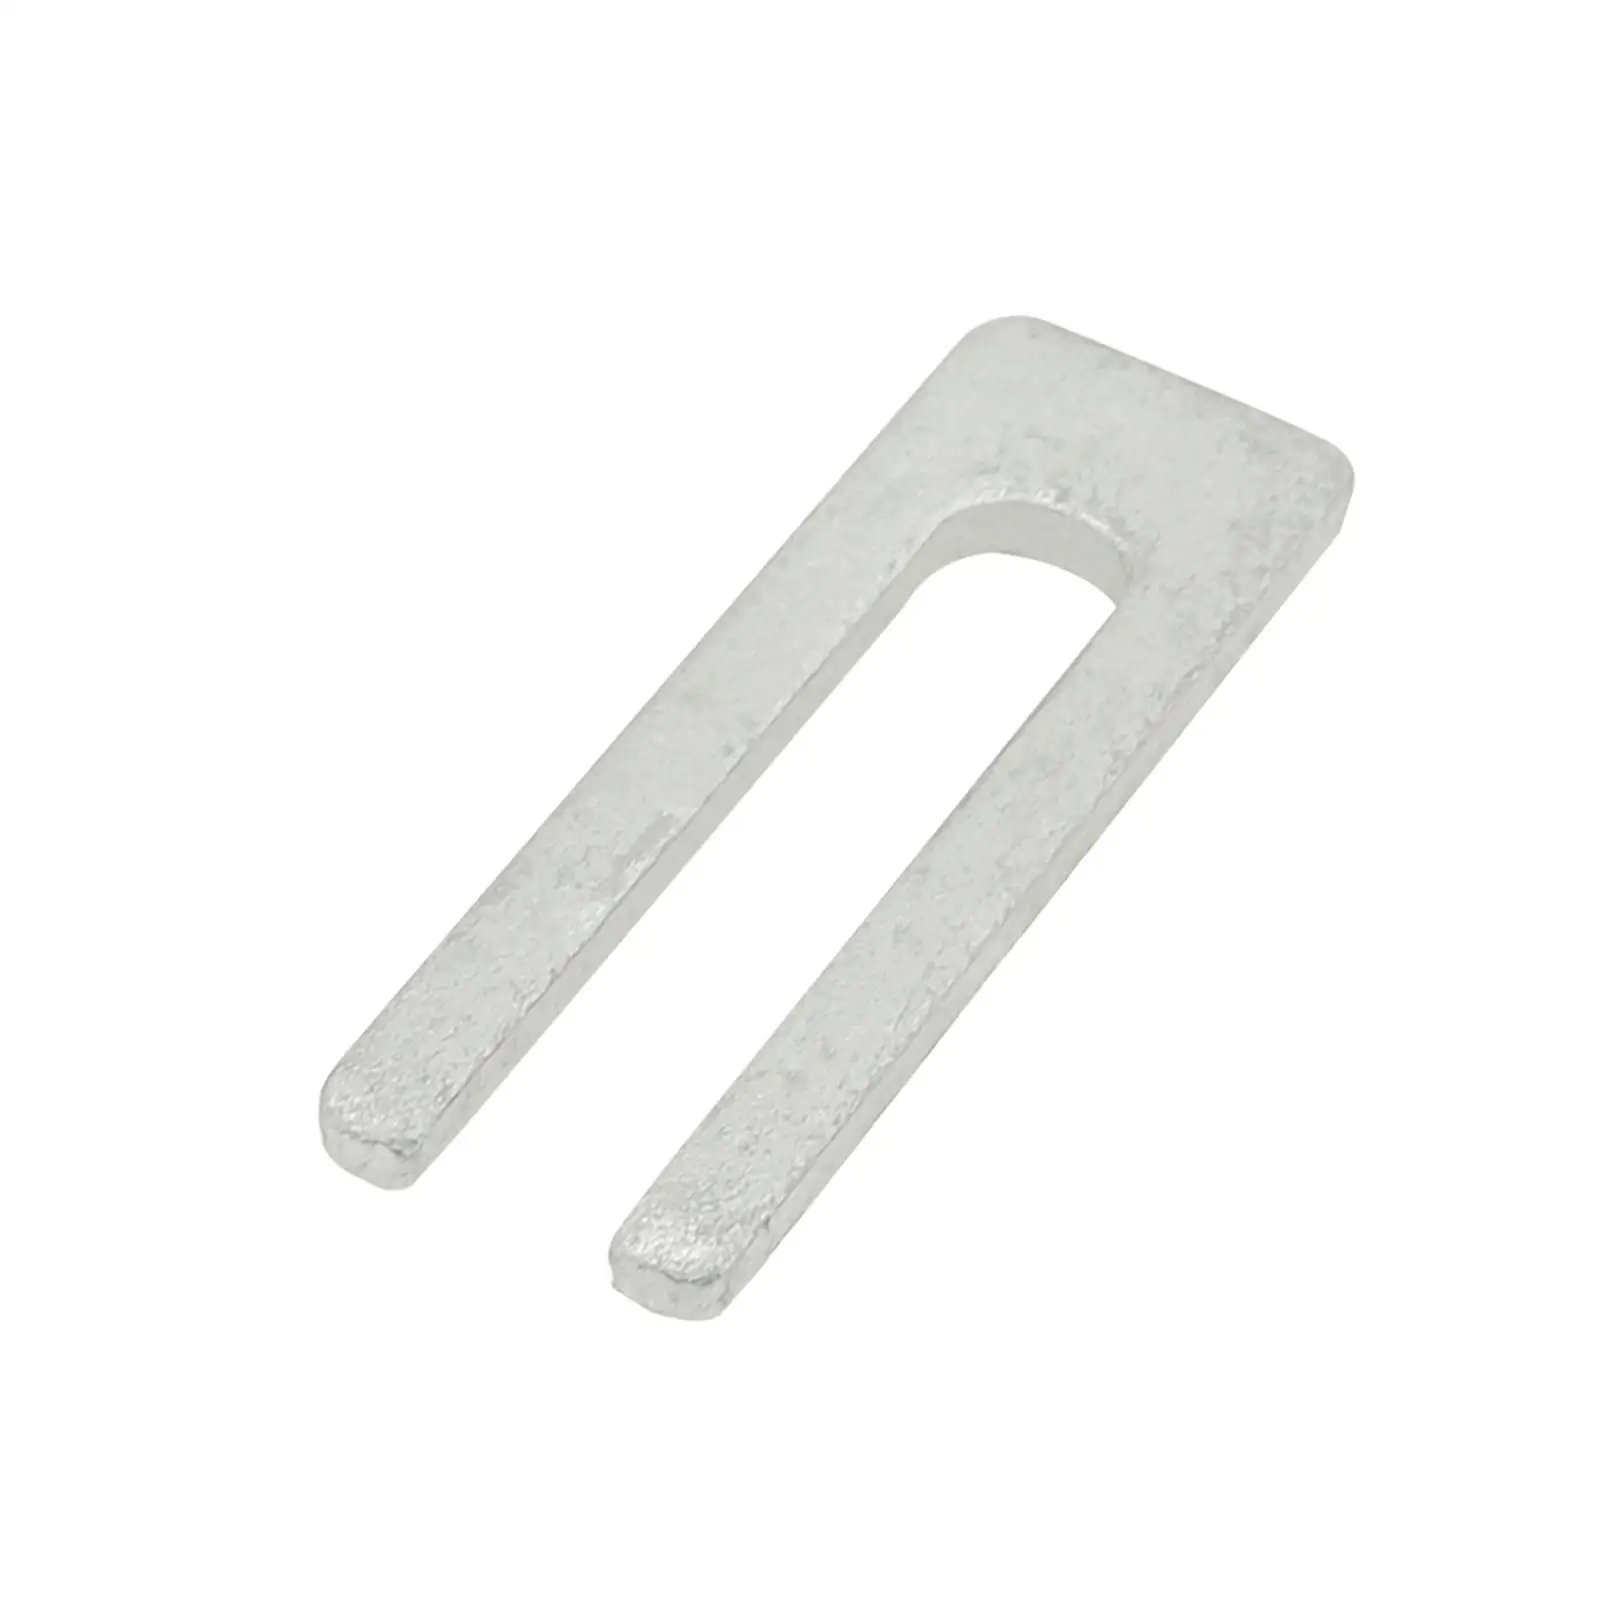 6H3-48538-00 for Outboard Remote Control Easy to Install Cable Clamp